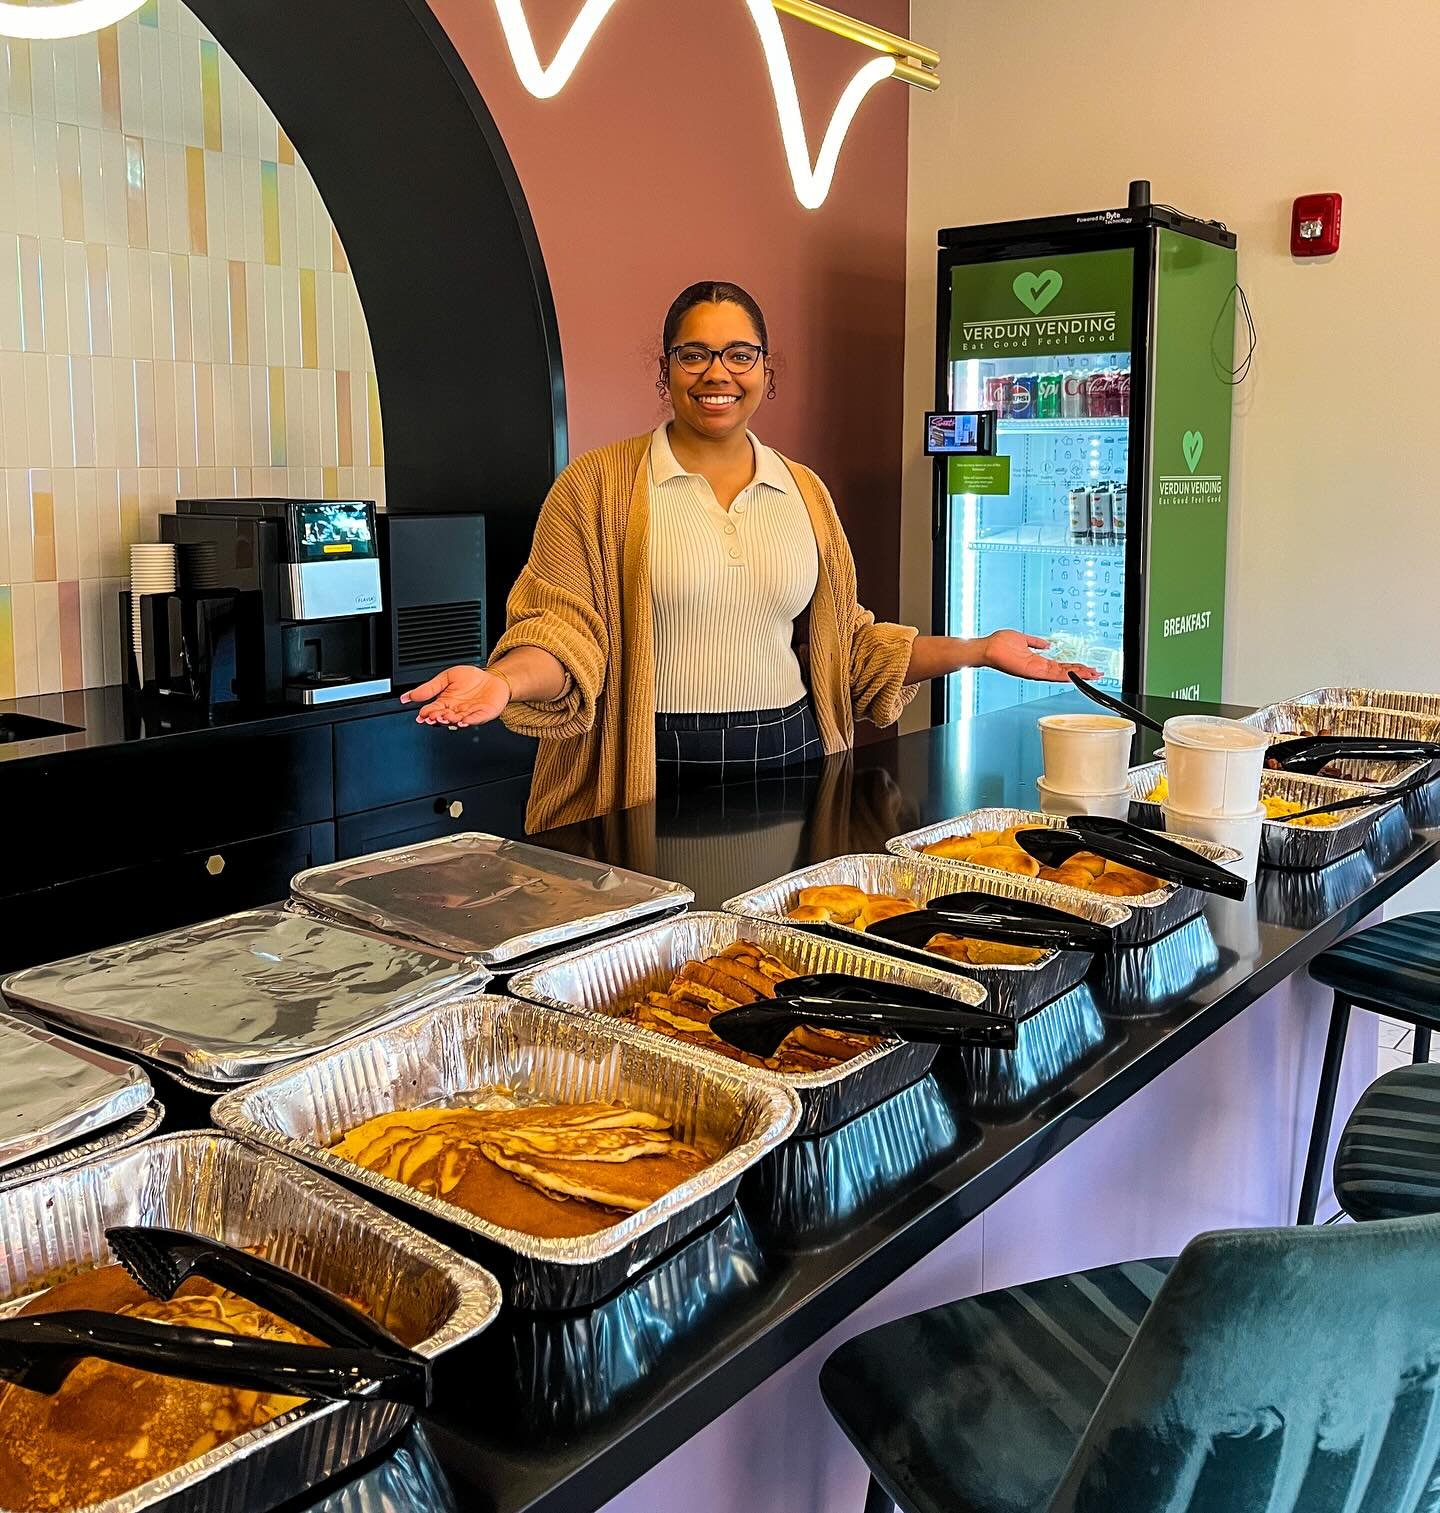 Breakfast Break! Take a break from studying for finals and come enjoy some breakfast for dinner. Ascend has you covered with multiple amenity spaces to study in after you&rsquo;re fueled up! 🤓📝🅰️